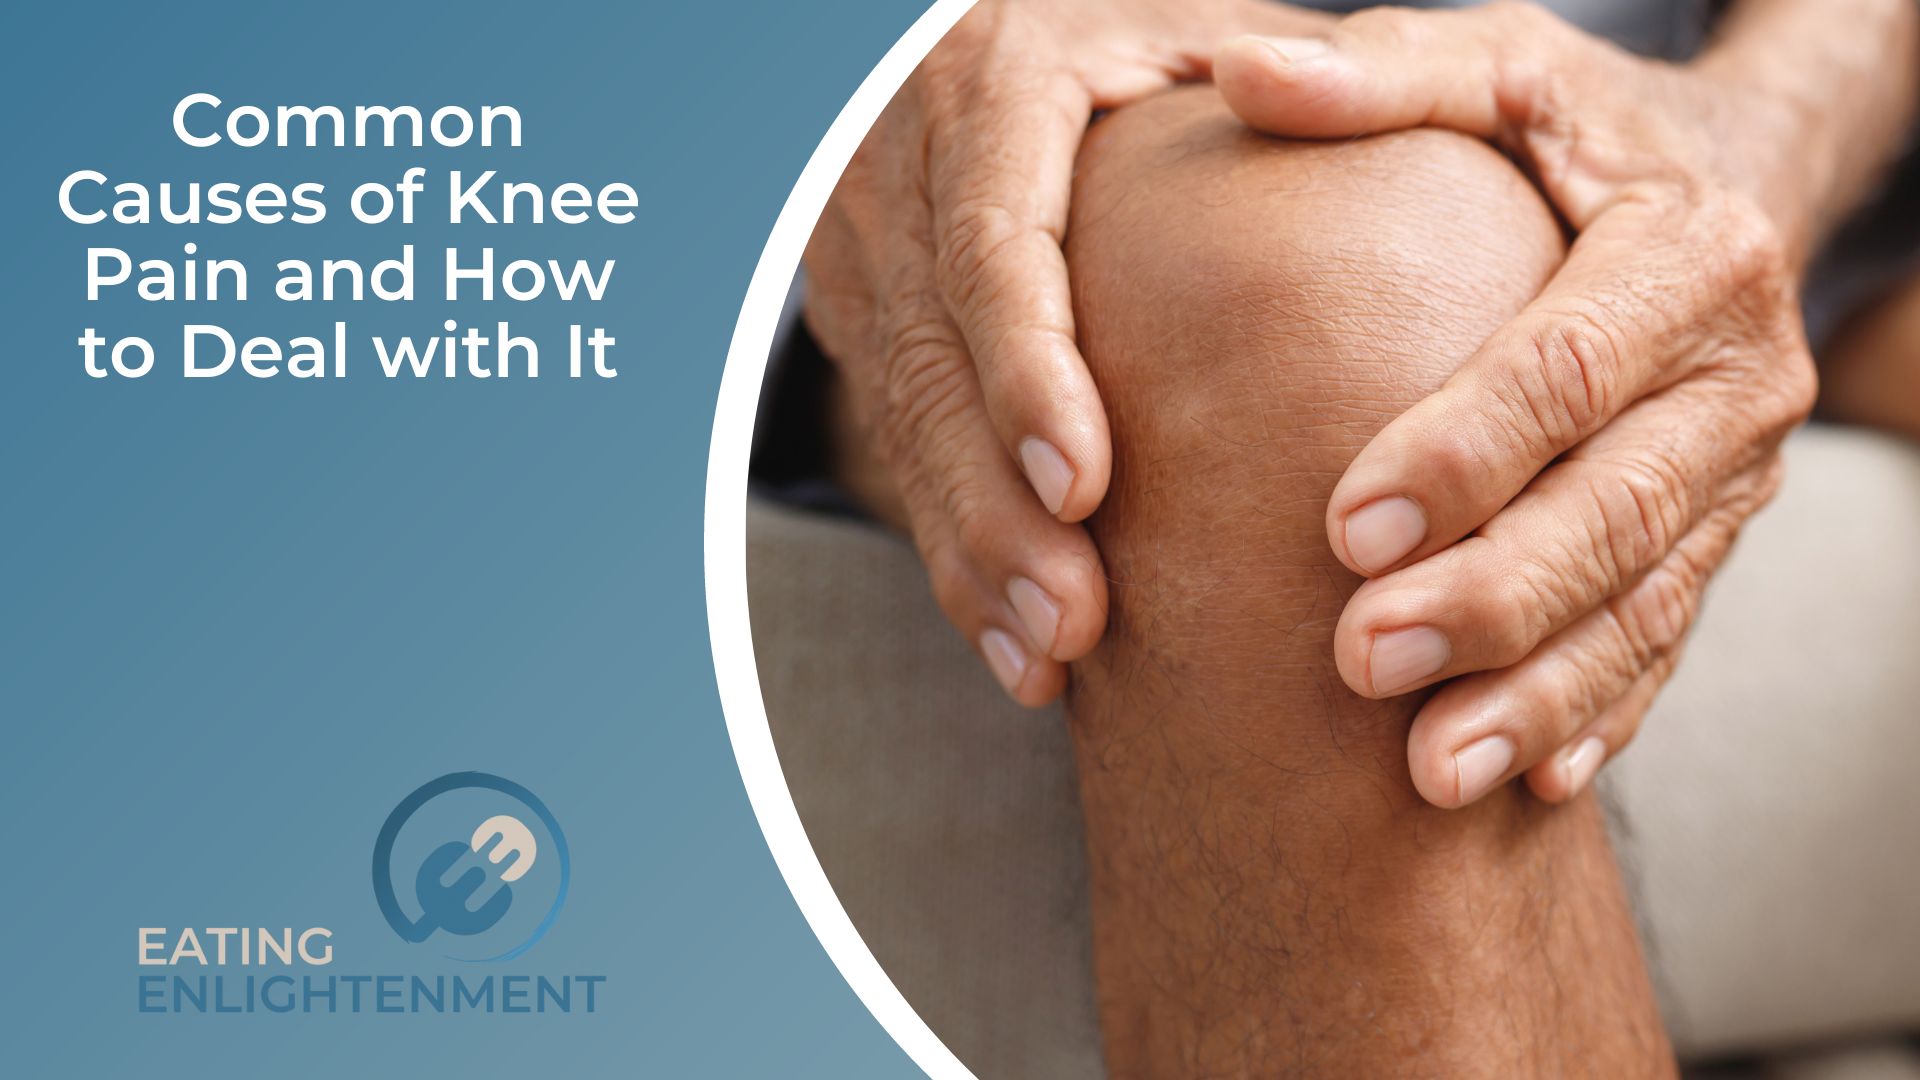 Common Causes of Knee Pain and How to Deal with It